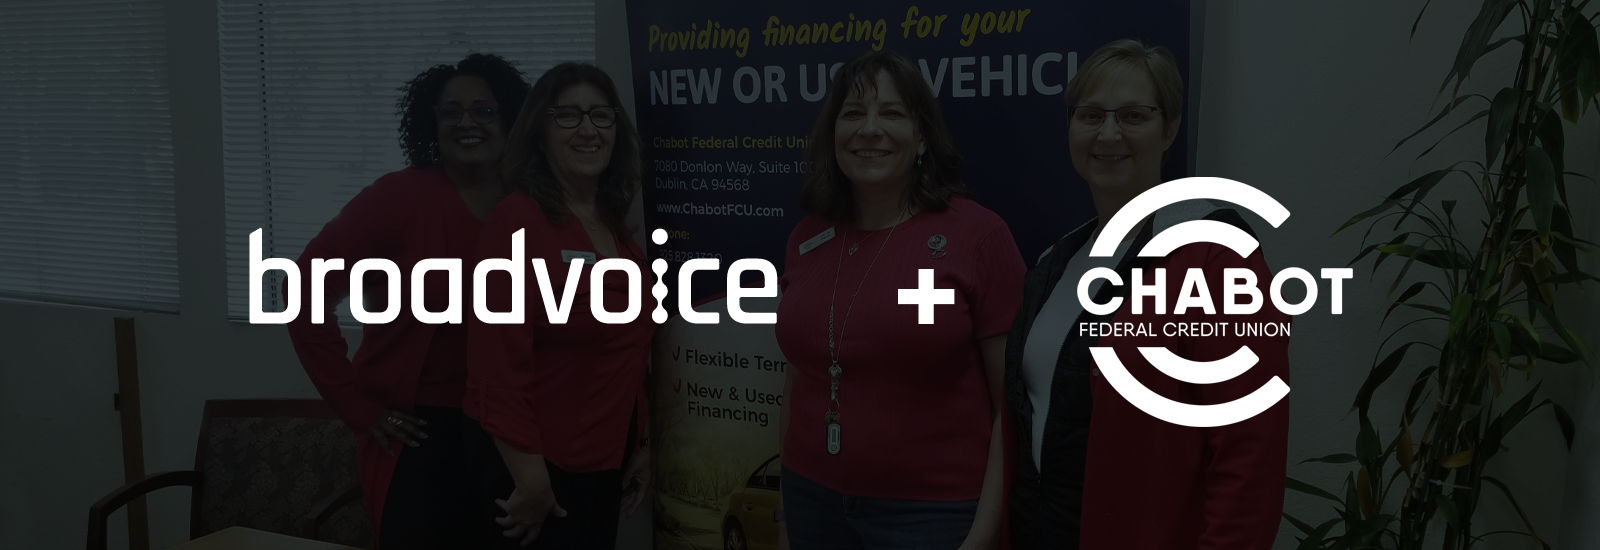 Chabot Federal Credit Union and Broadvoice.